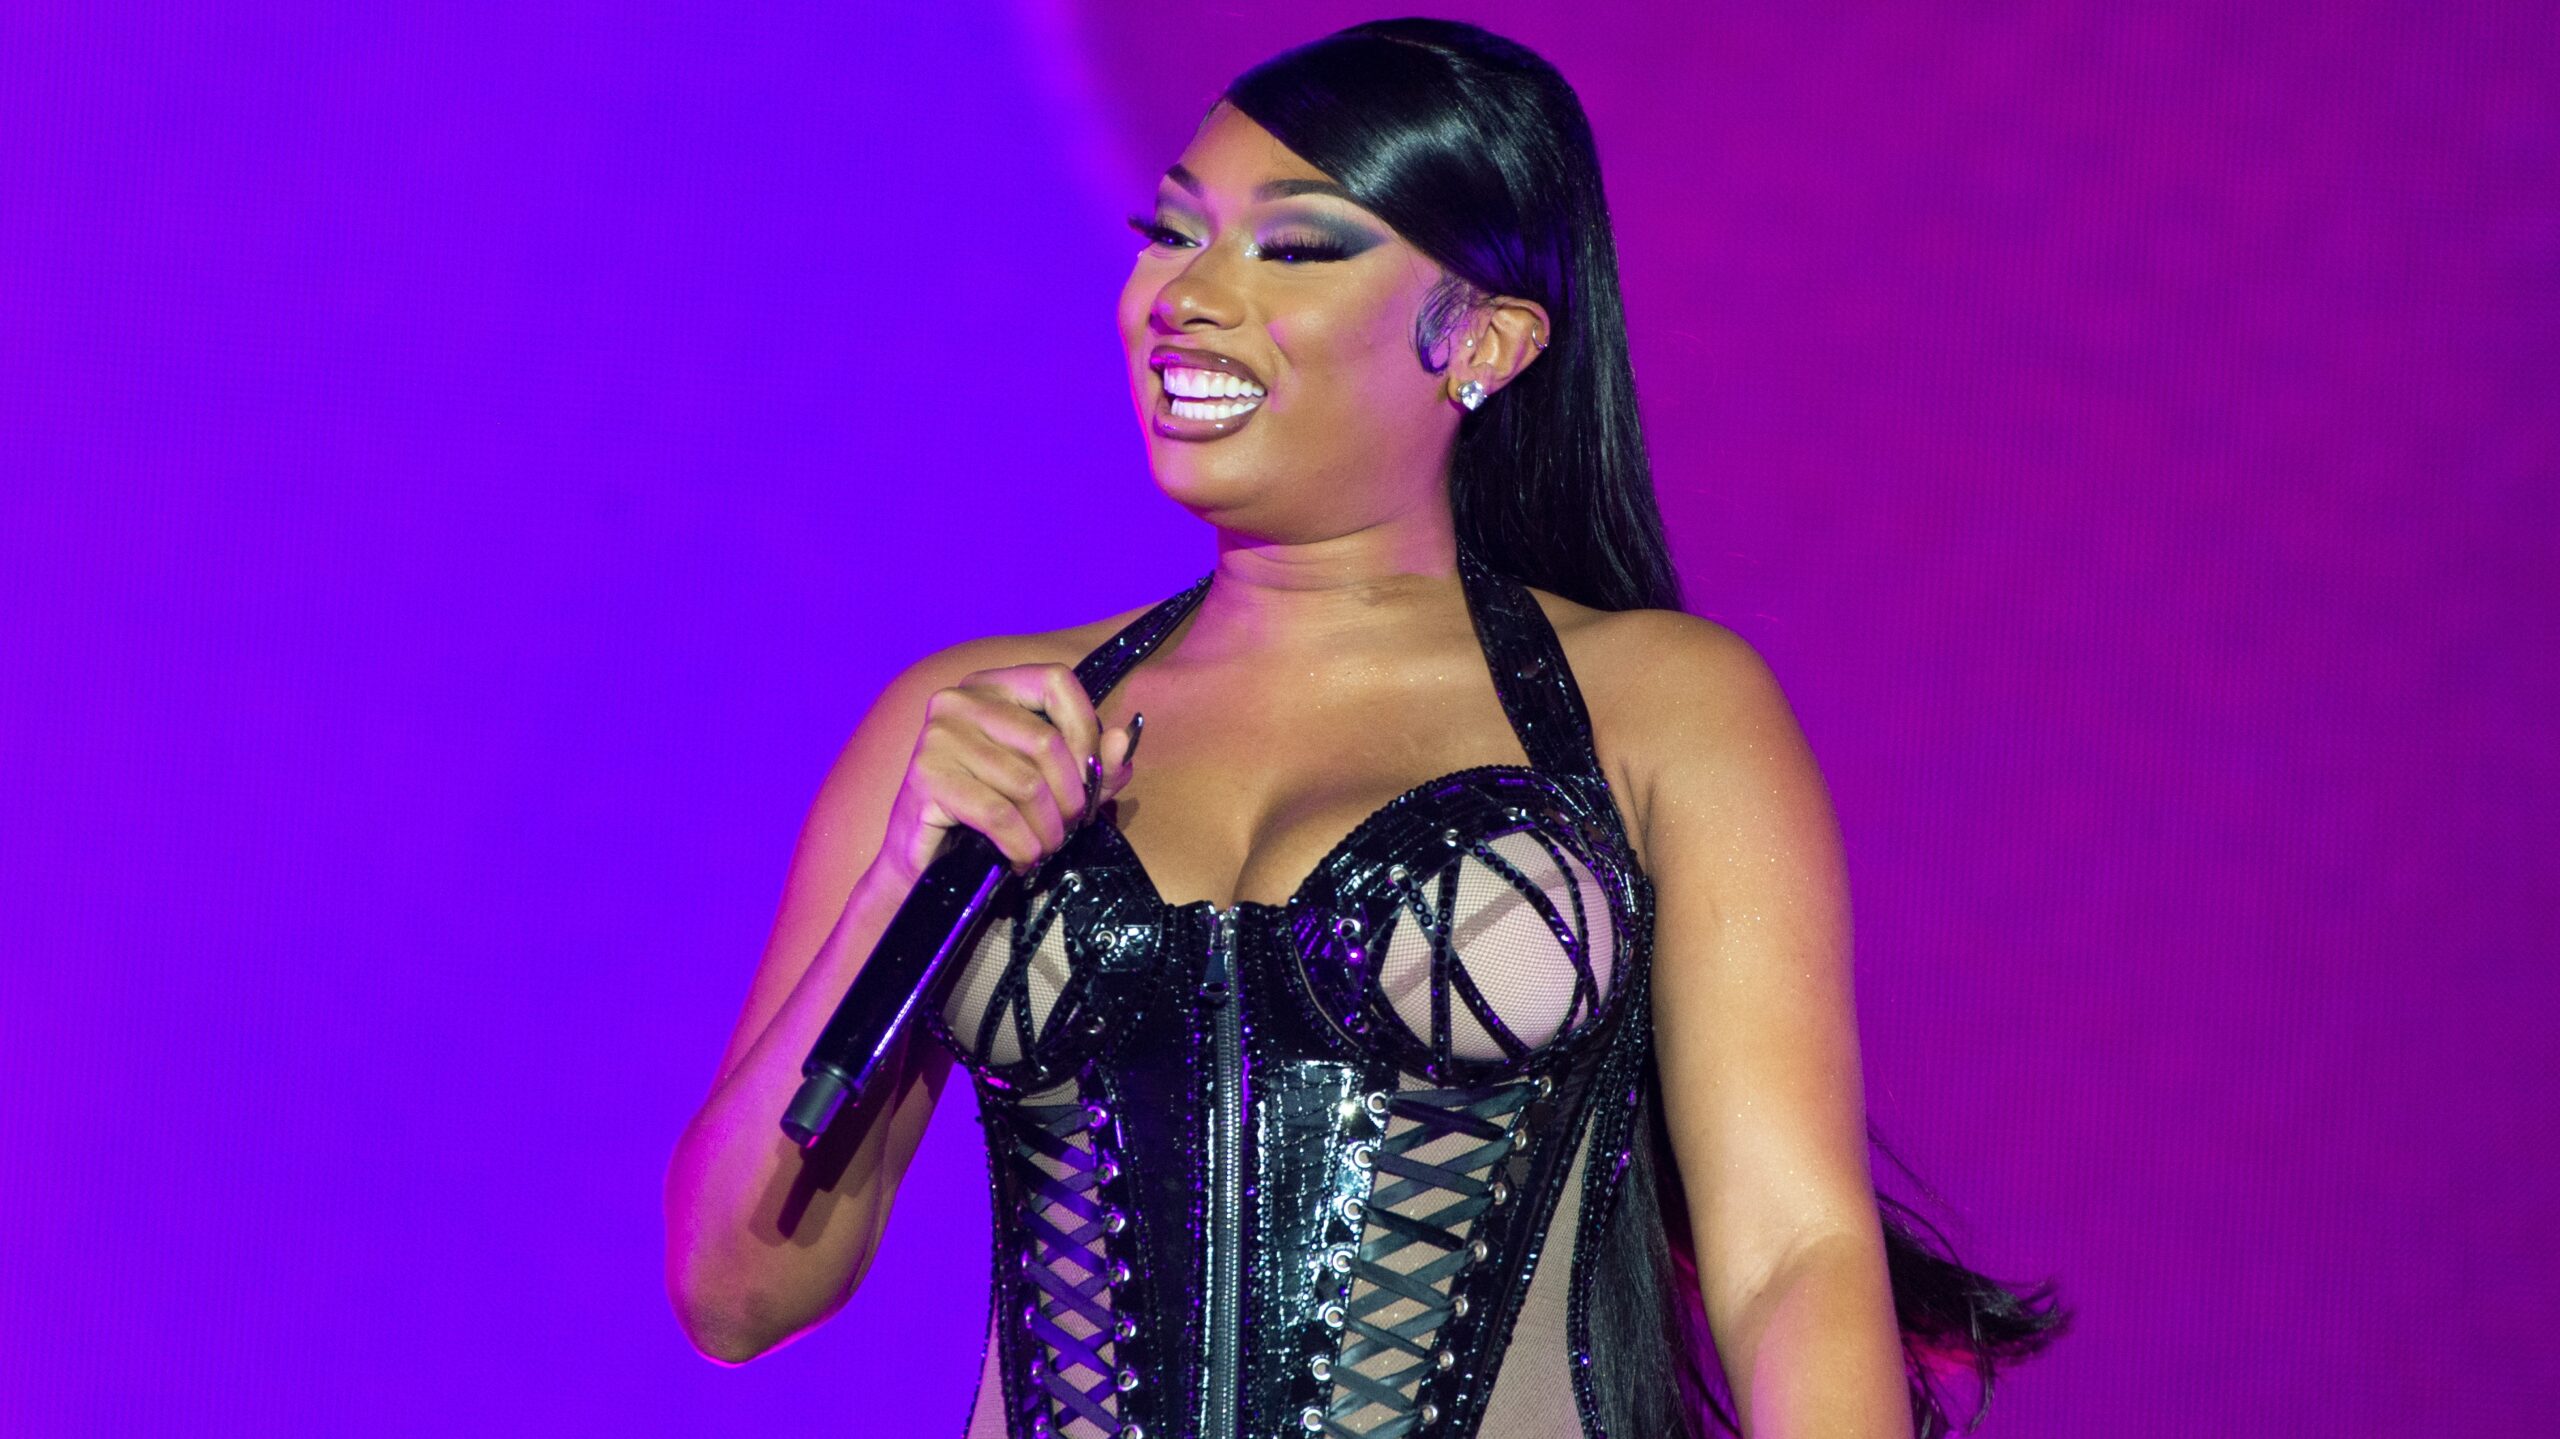 Megan Thee Stallion Receives Open Letter Of Support From Southern Black Girls & Women’s Consortium